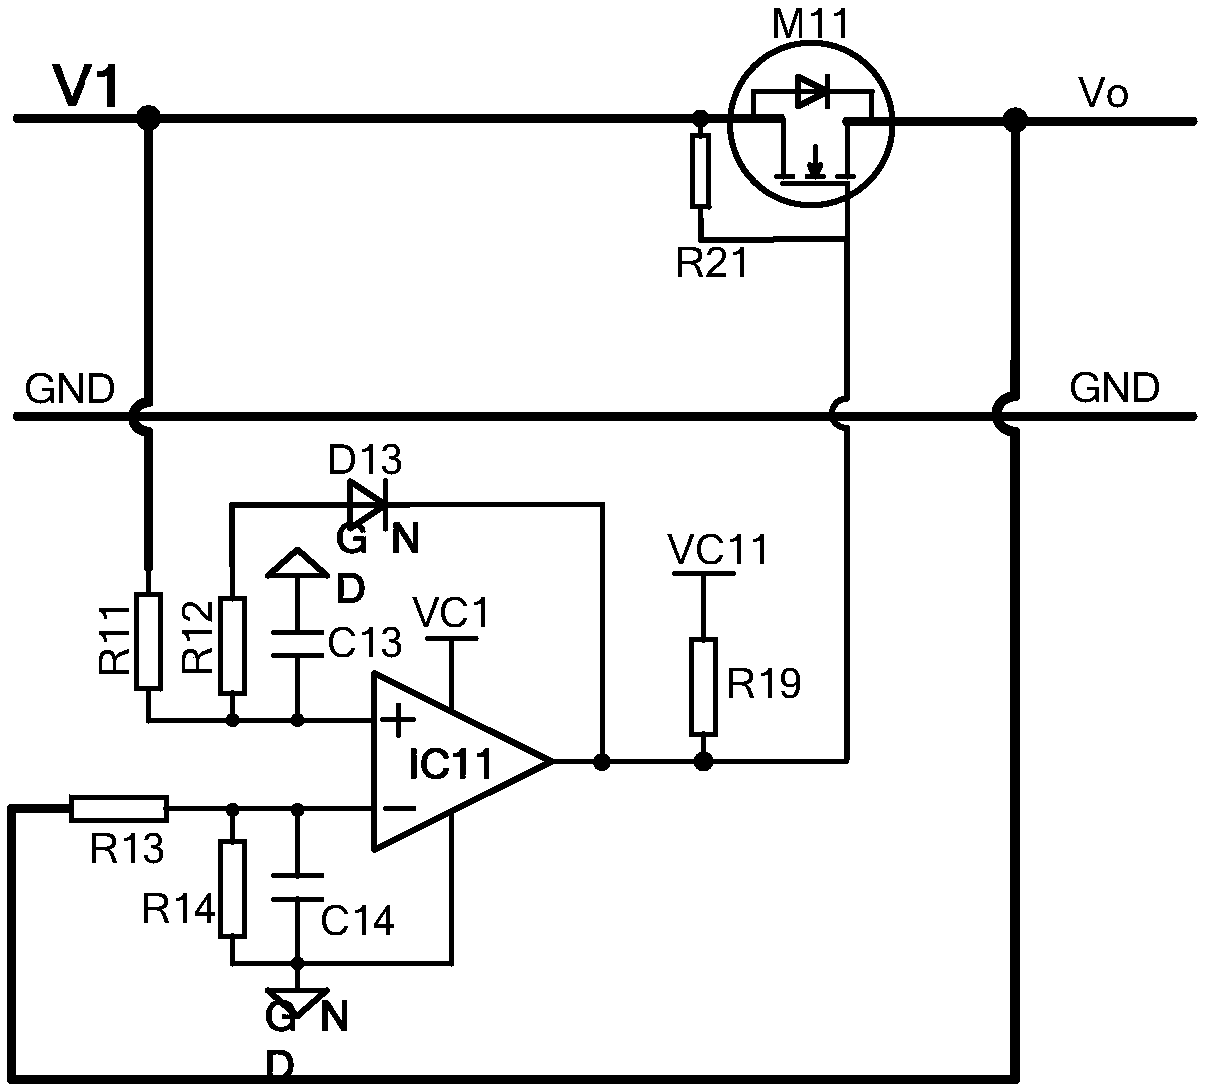 A main backup power failure detection and automatic switching control circuit